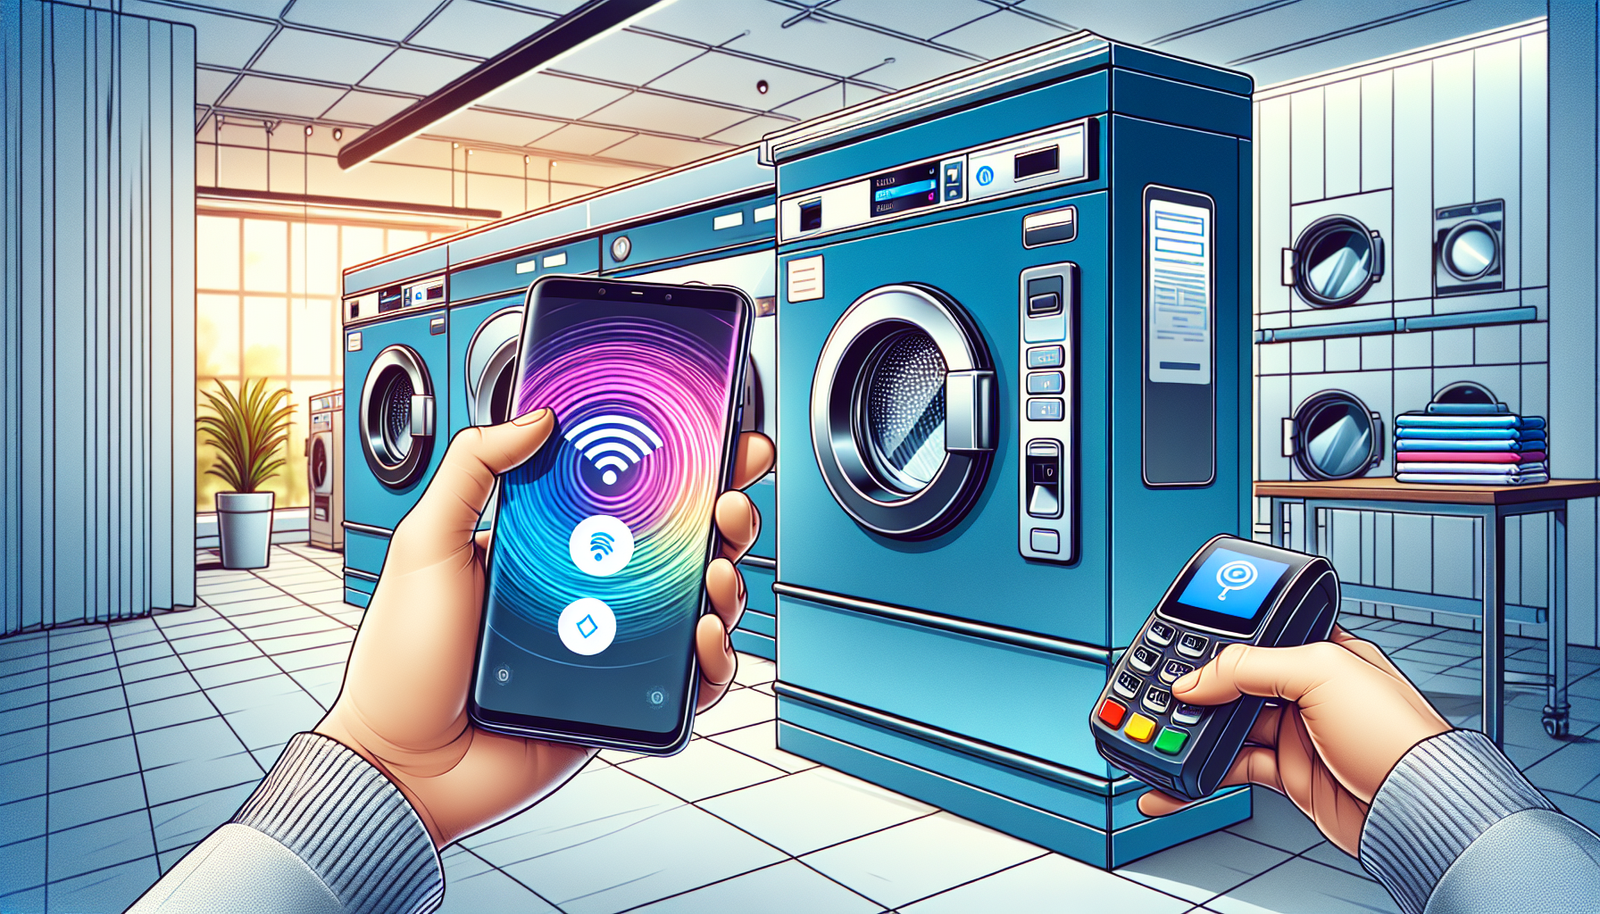 Illustration of a person using a mobile payment at a laundromat